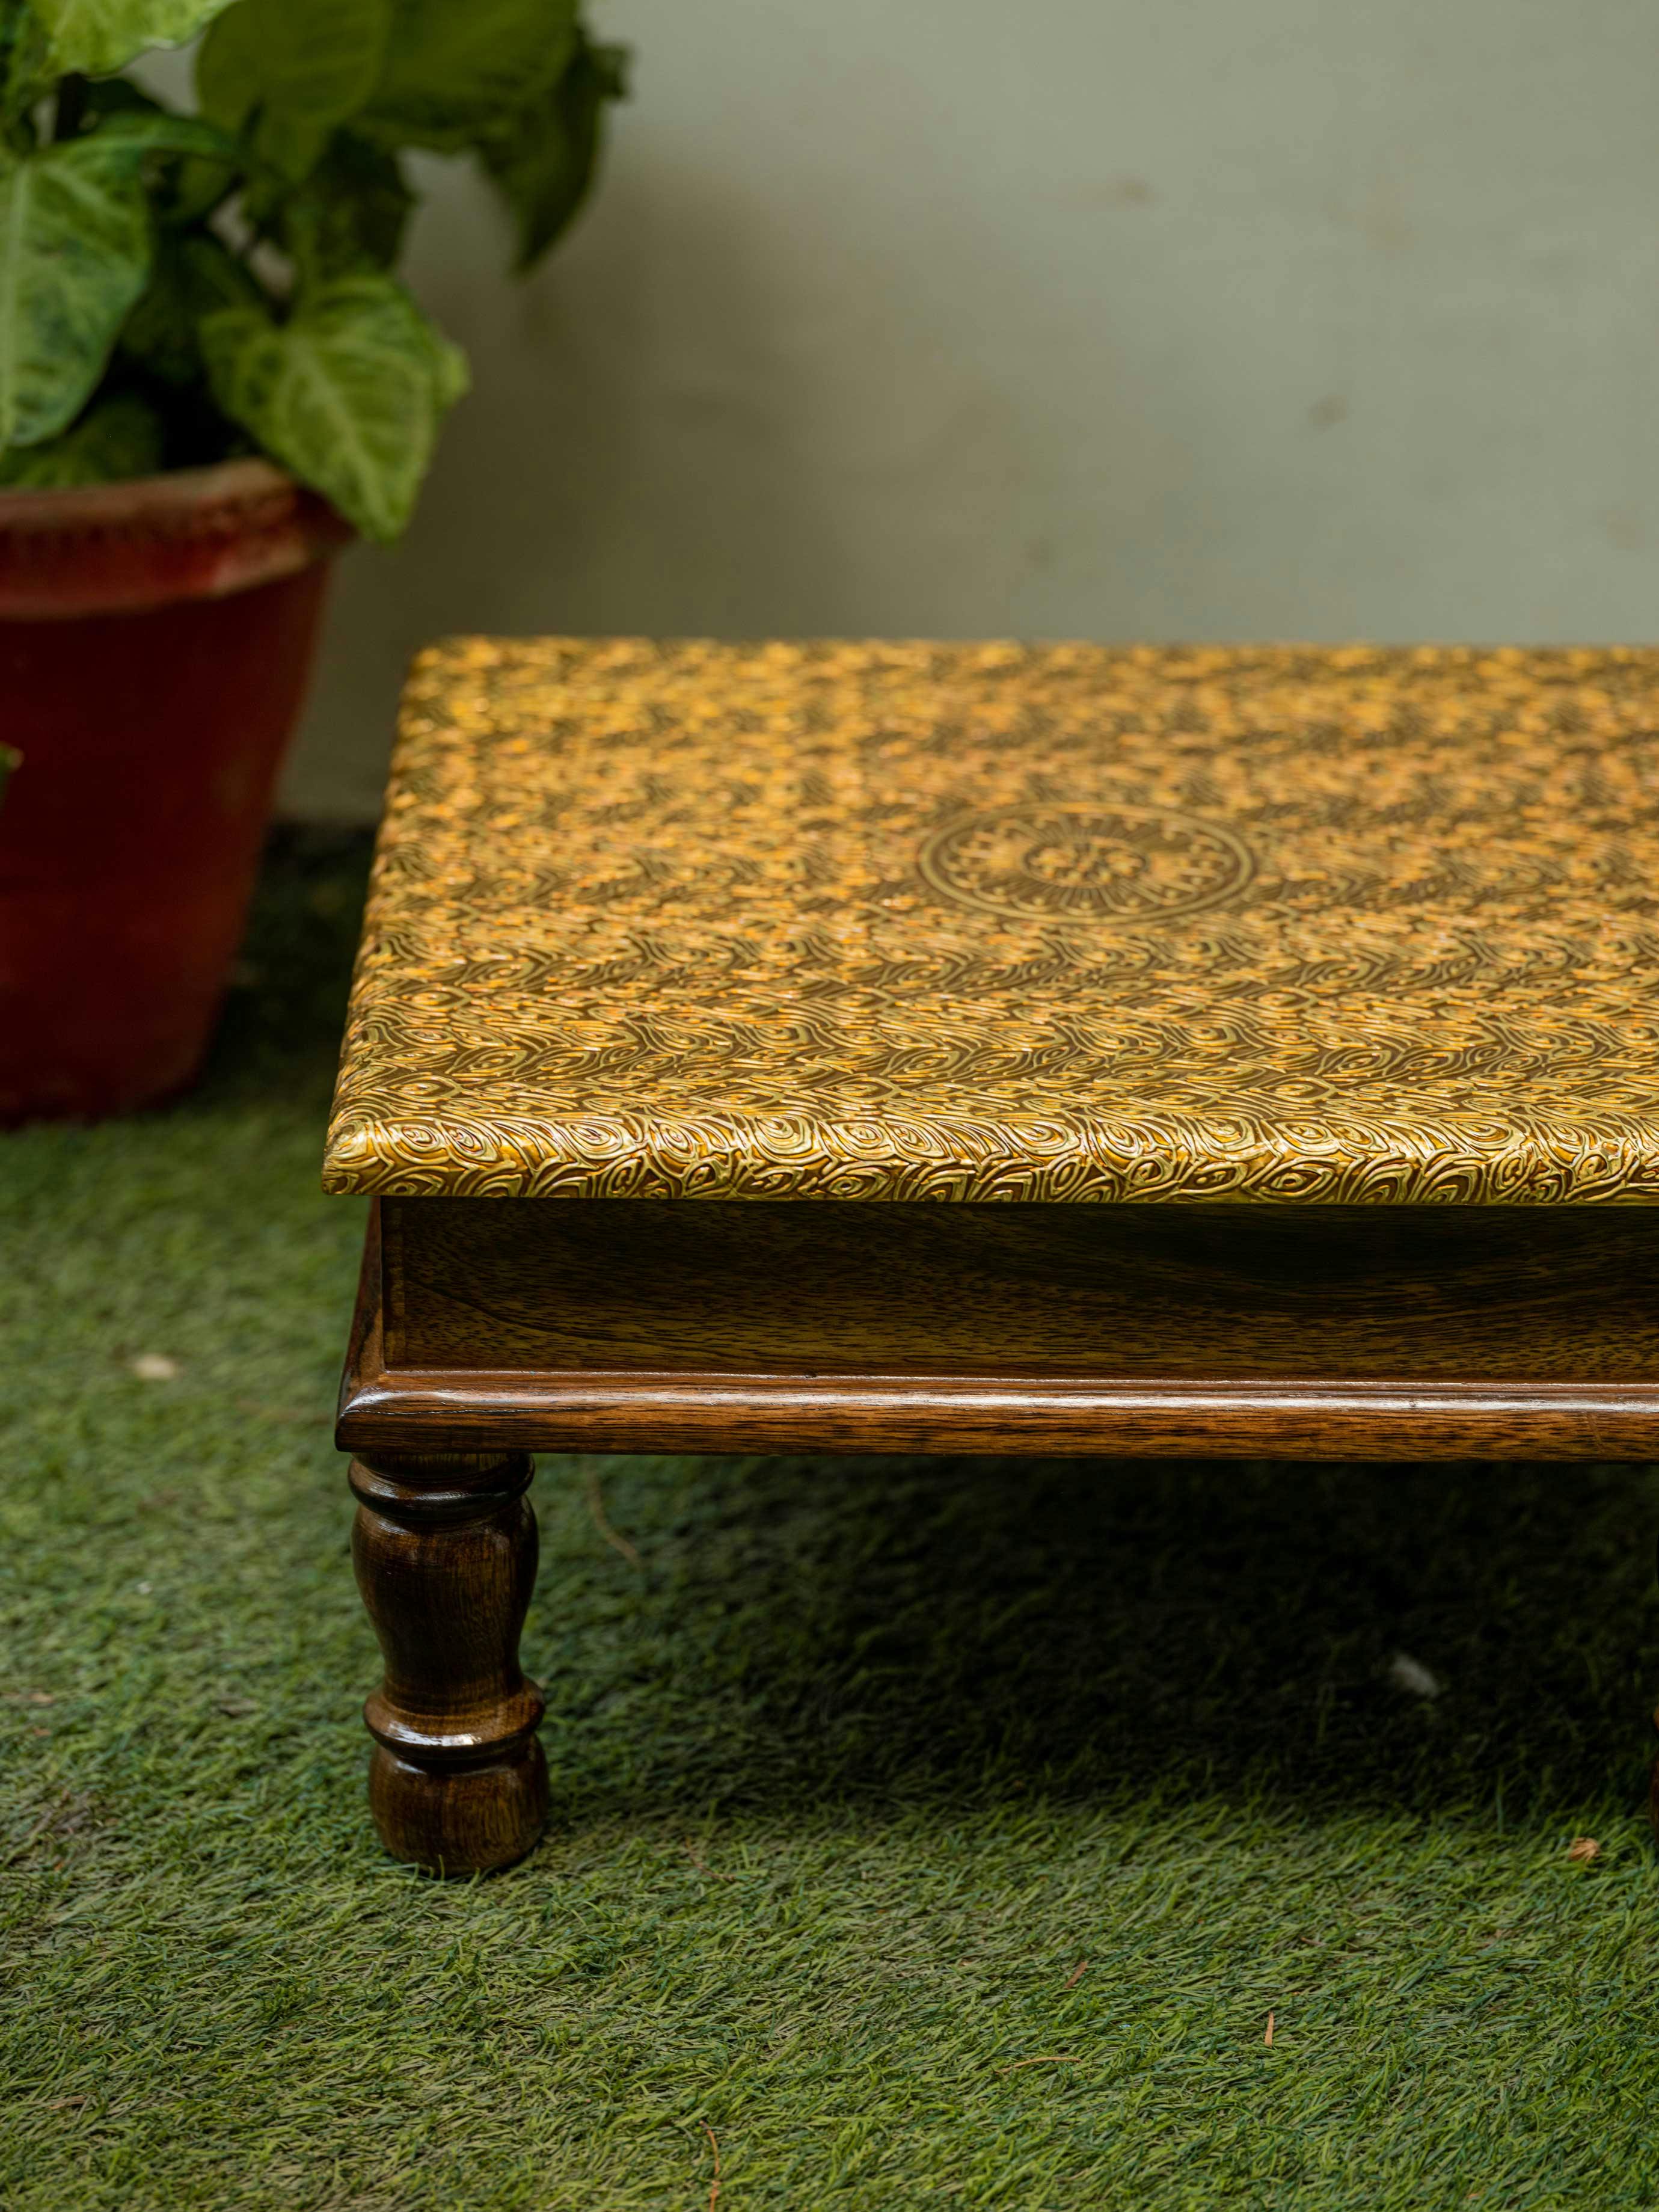 Zar - Wooden low stool with golden work, a product by Araana Homes